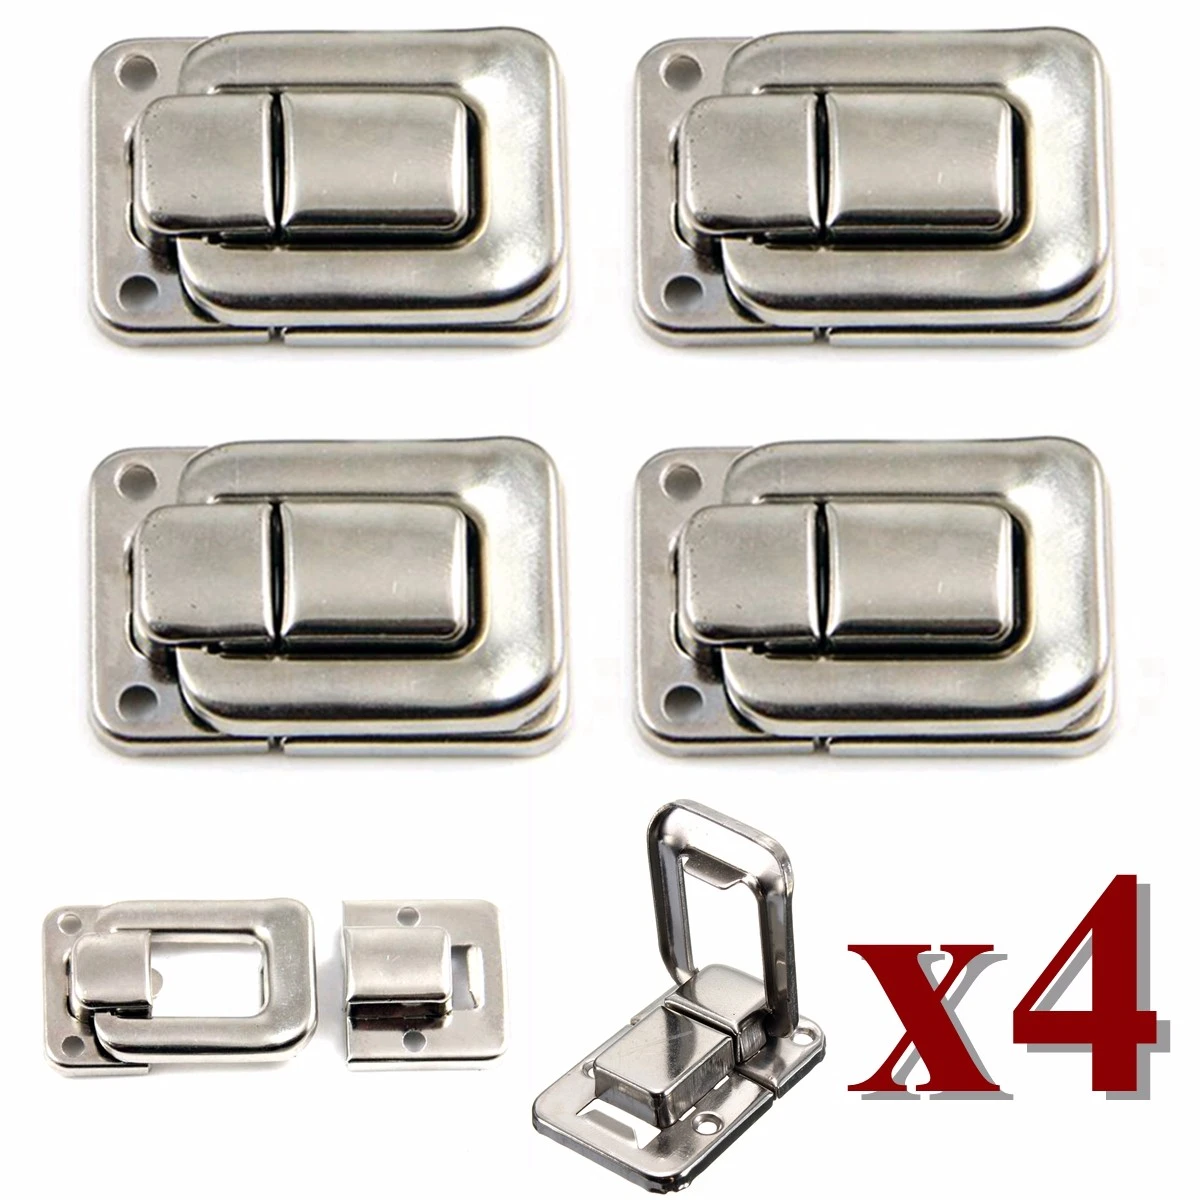 Ideal Peixiang Smoothly 4X Fastener Toggle Lock Latch Catch 37mm x 25mm for Suitcase Case Boxes Chests Trunk Nickelage Color : 1 Pieces Color : 1 Pieces 